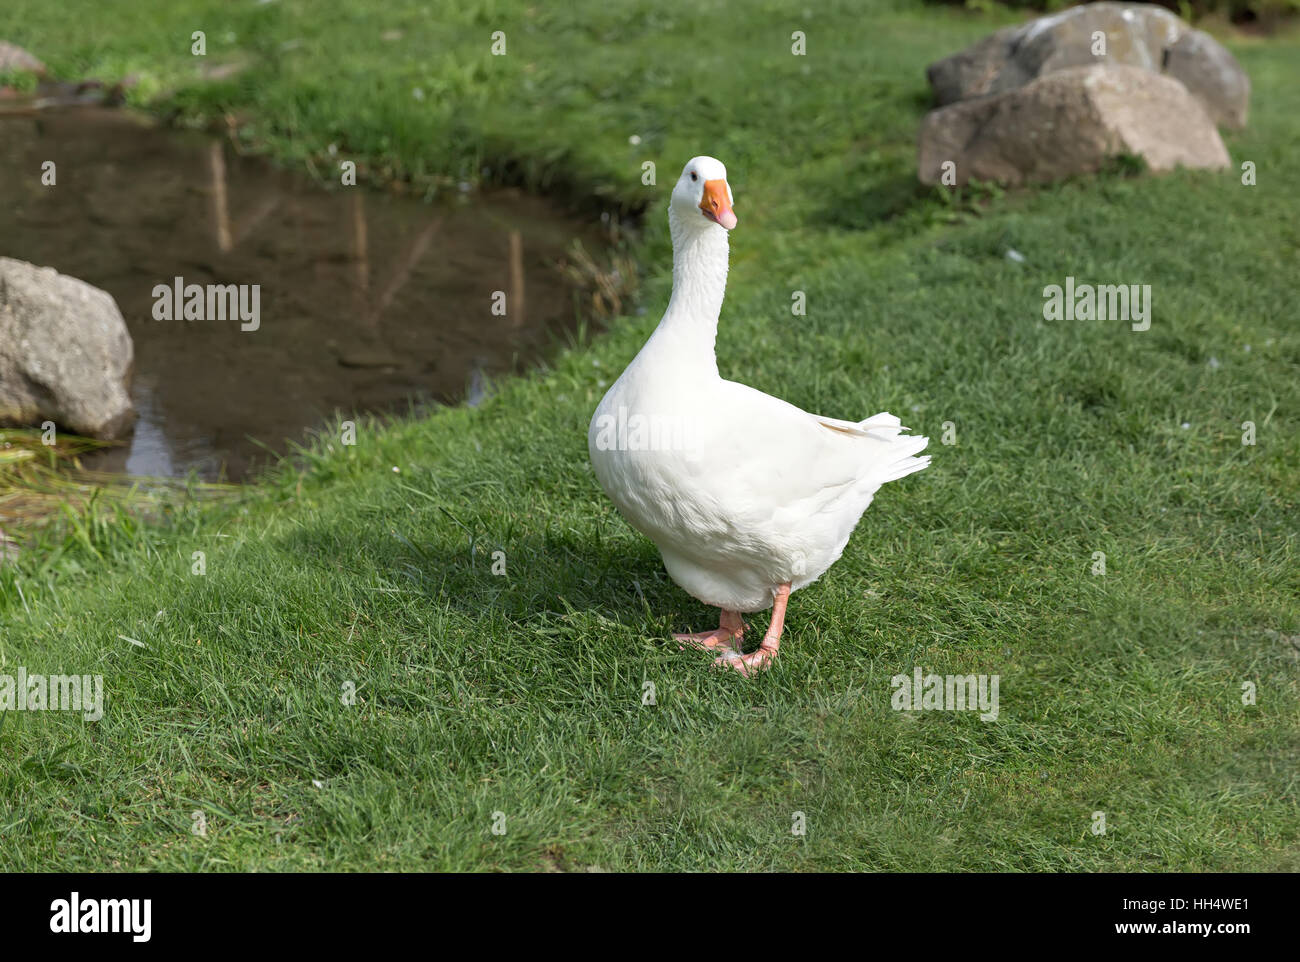 single white goose standing on the green grass Stock Photo